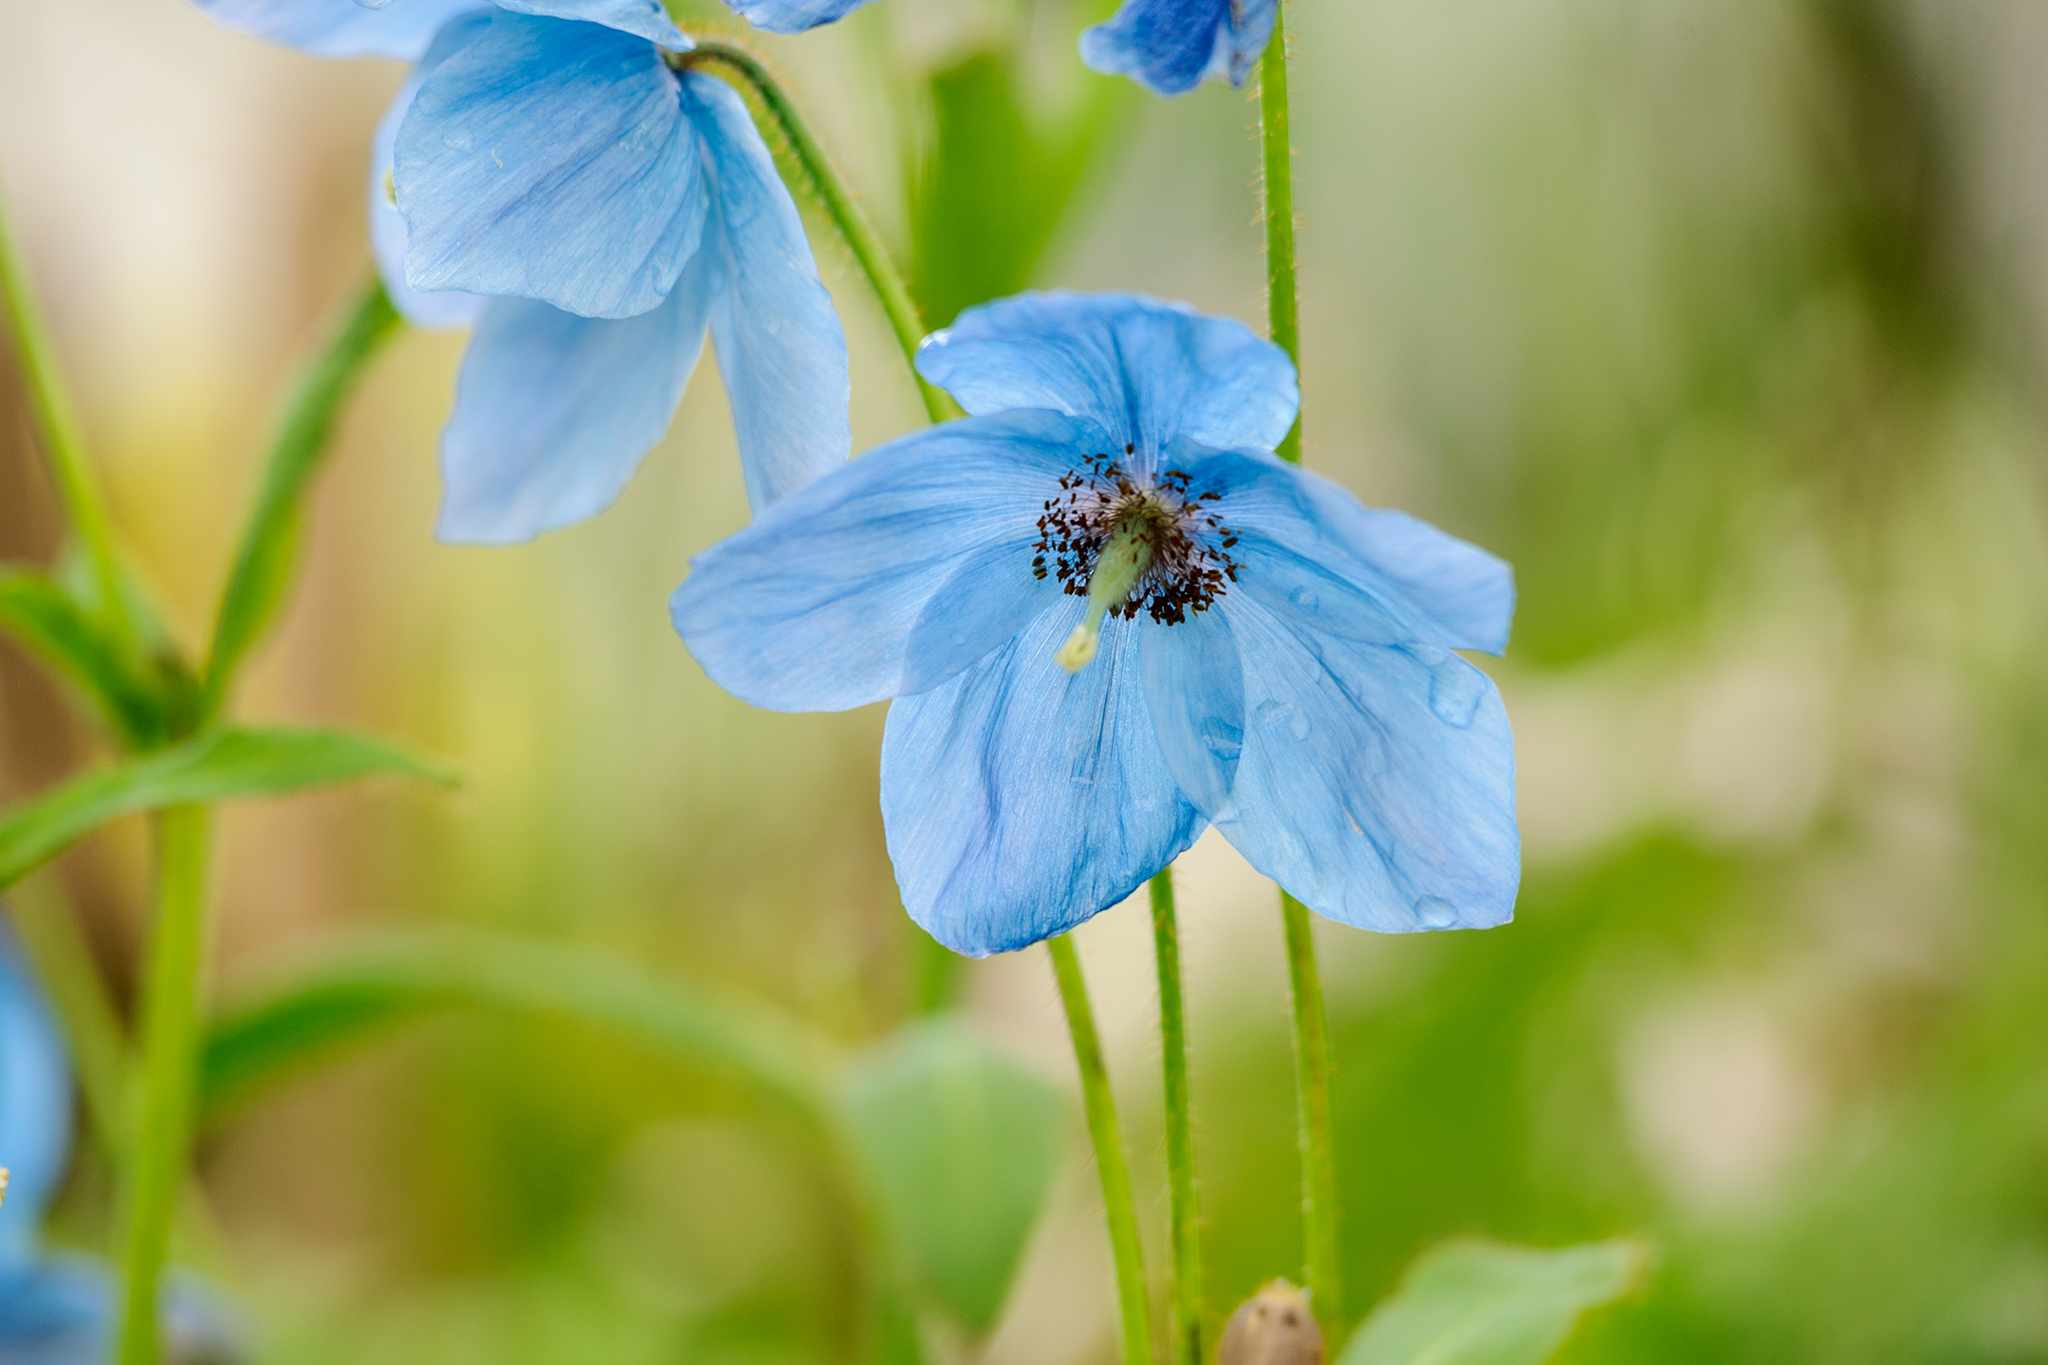 Plants for shade – Meconopsis 'Slieve Donard'